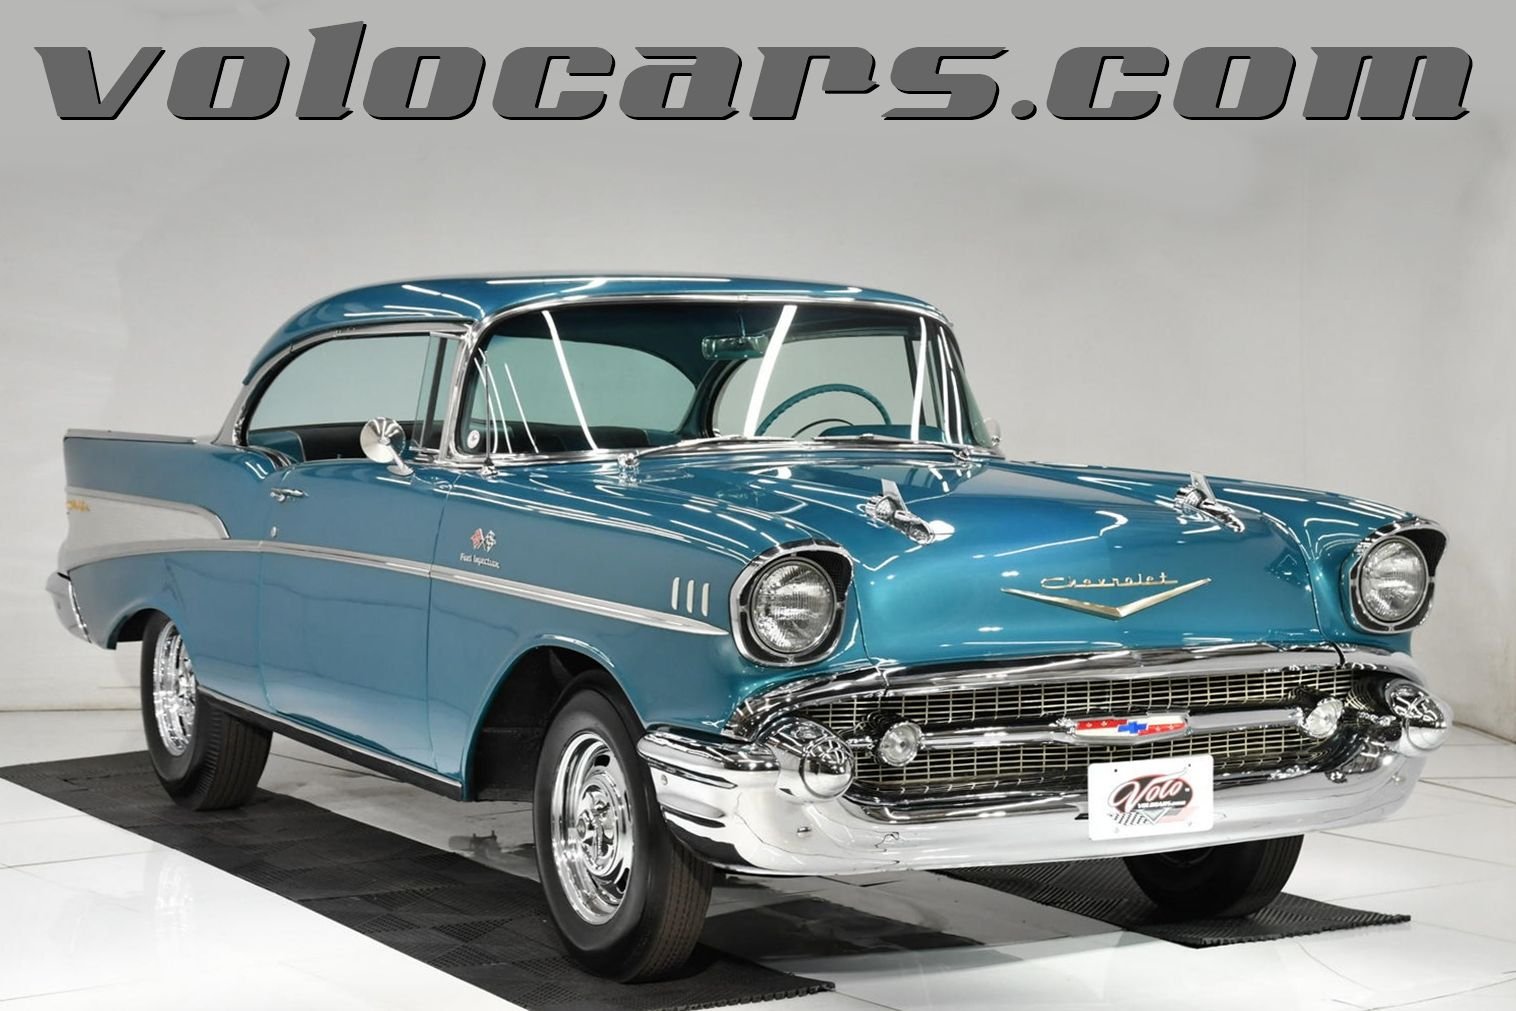 1959 Chevrolet Impala and Bel Air Vintage Look Reproduction Metal sign 8 x 12 